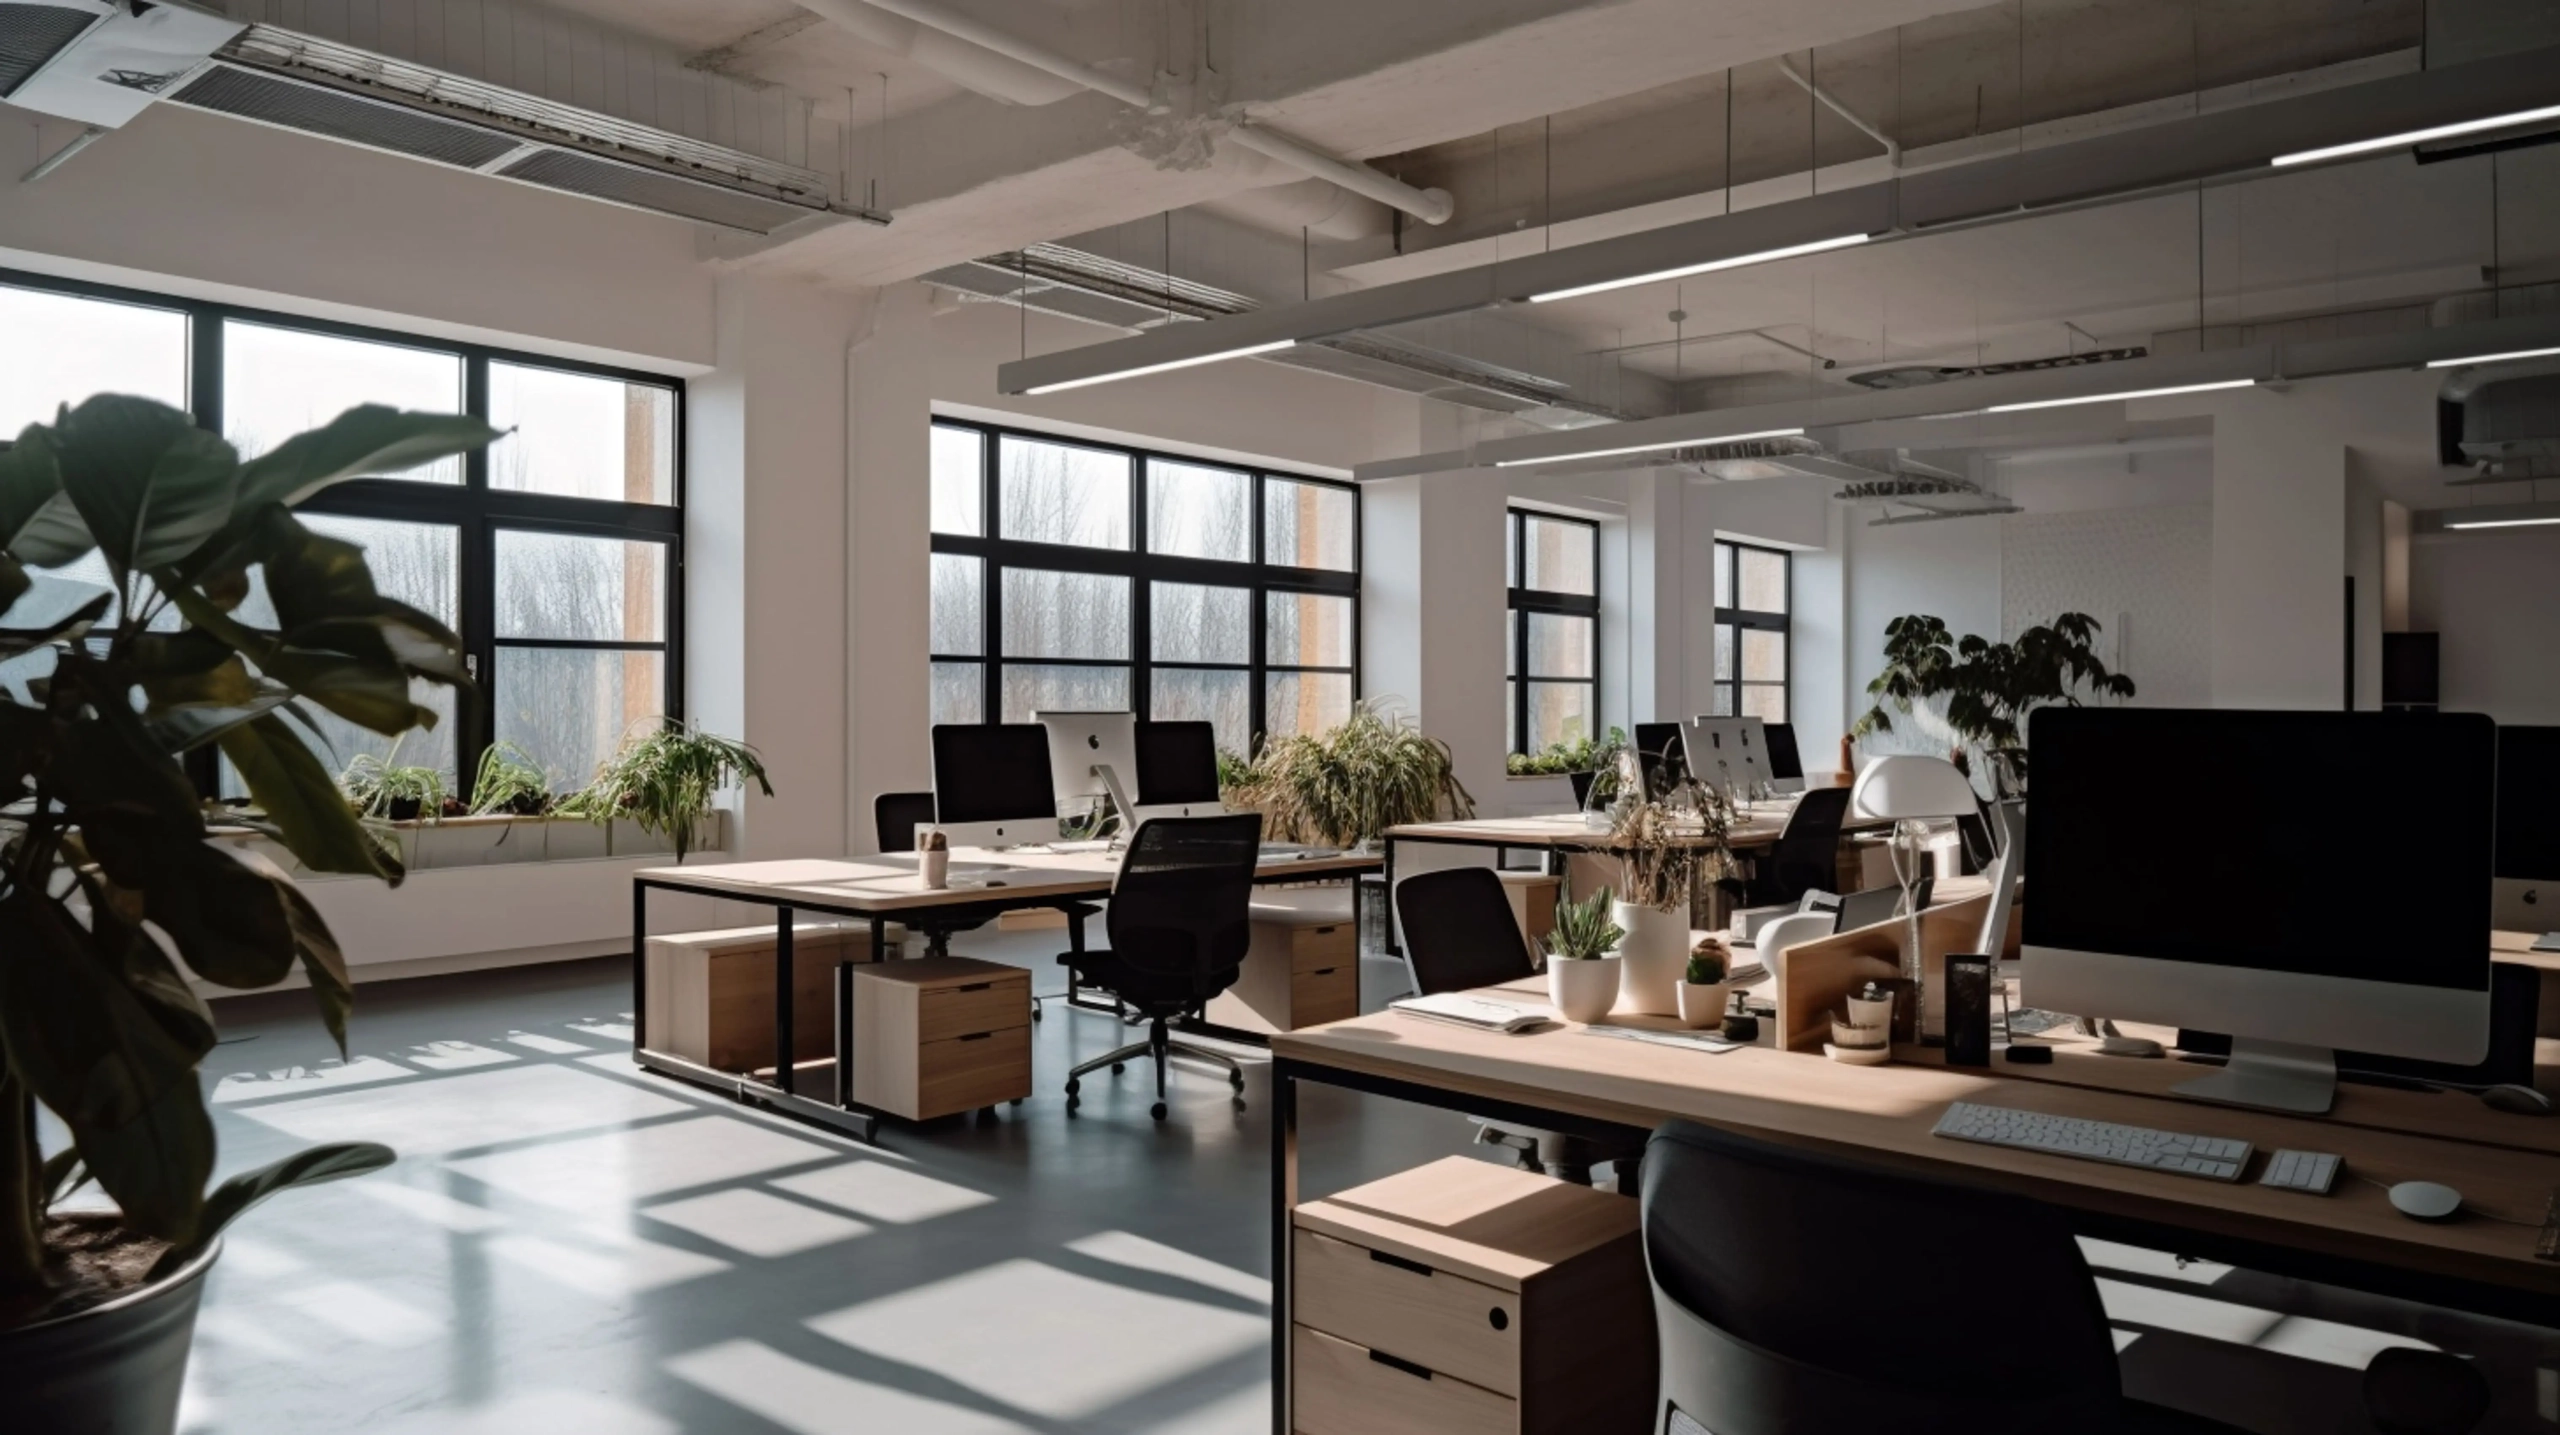 Exploring the post pademic status of offices spaces